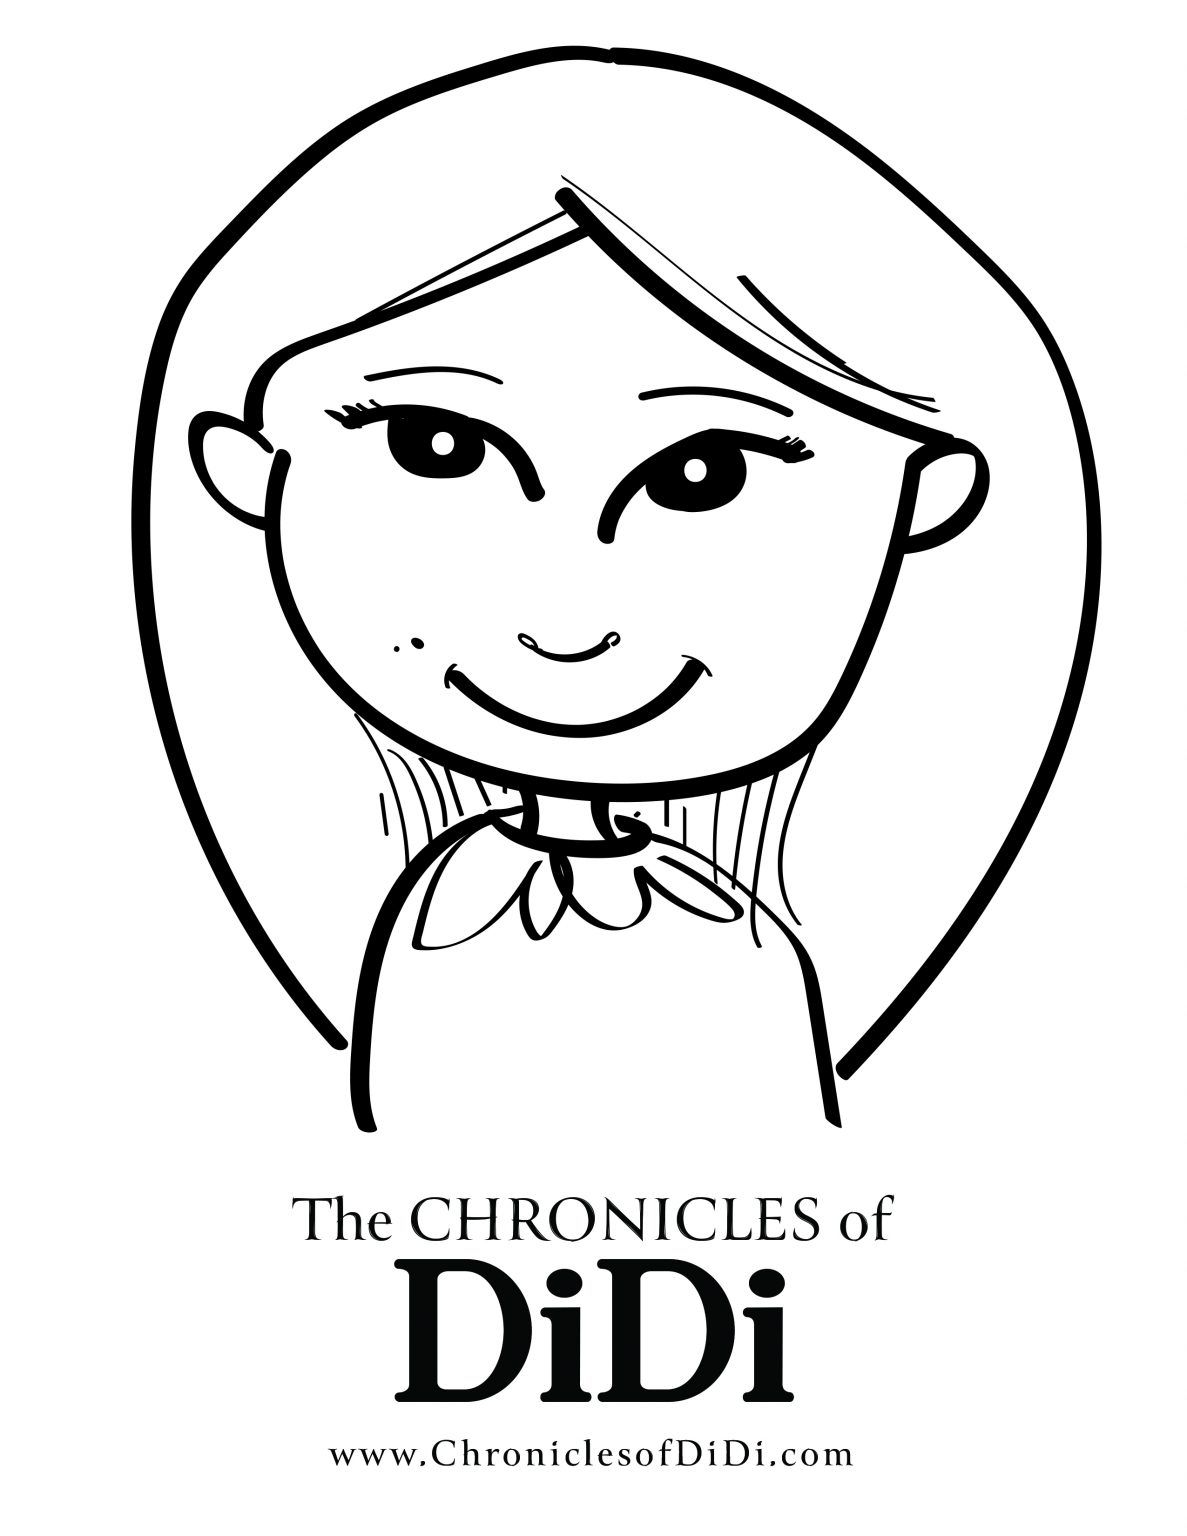 Coloring Pages – The Chronicles of Didi